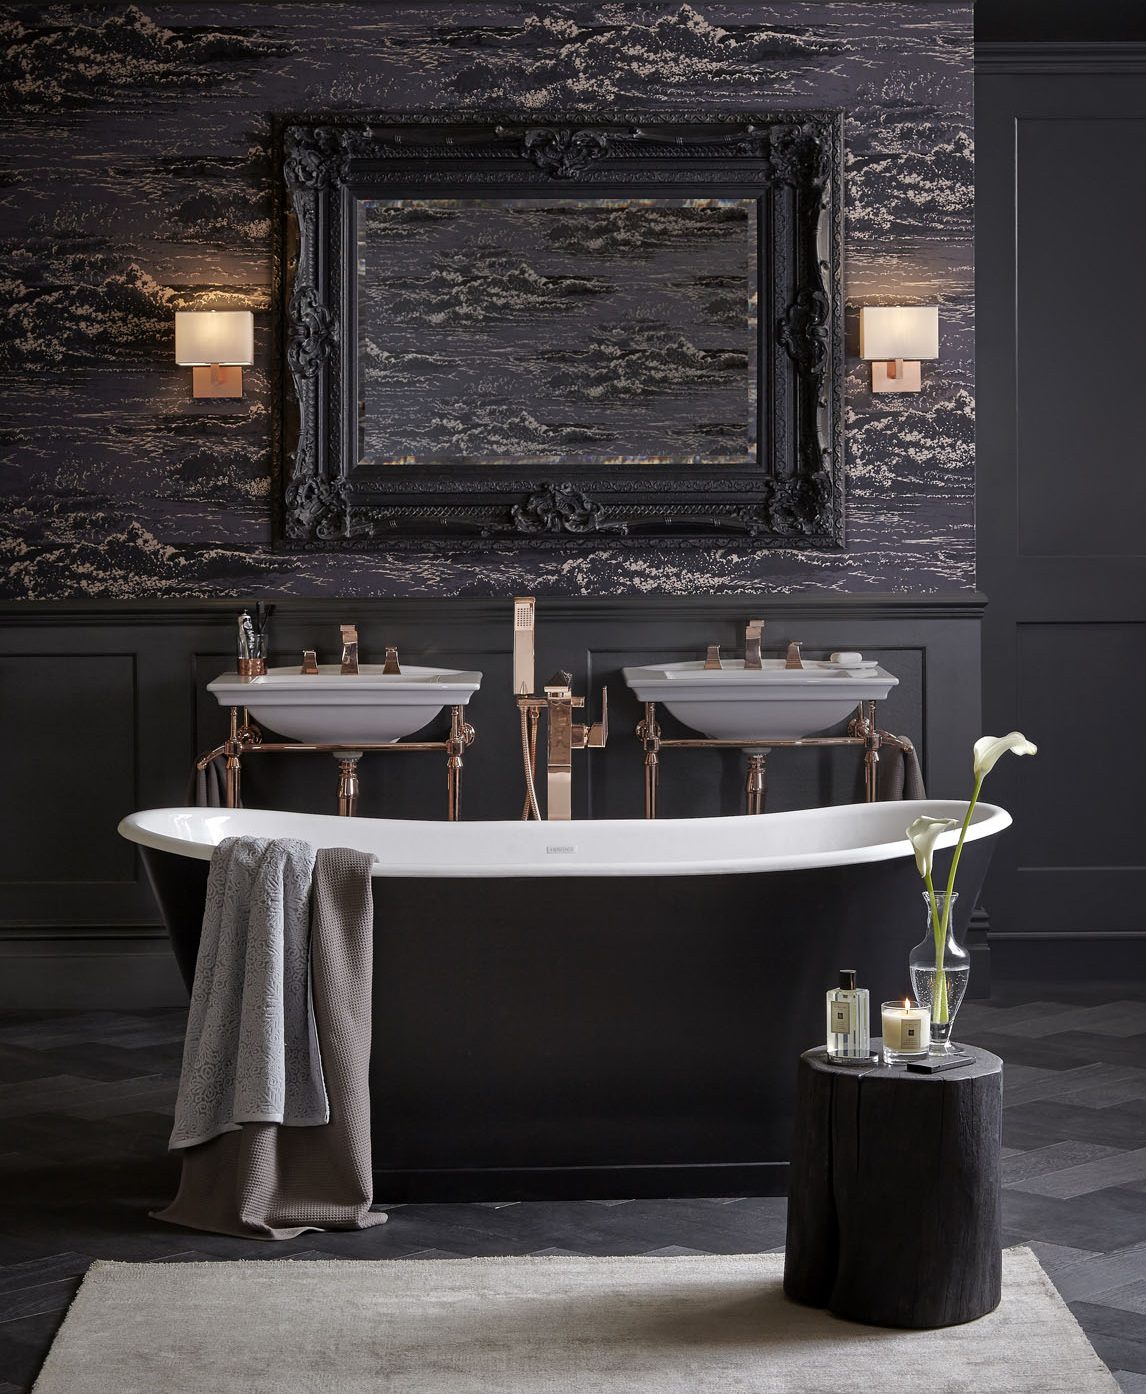 Heritage Bathrooms product images for SBID interior design blog